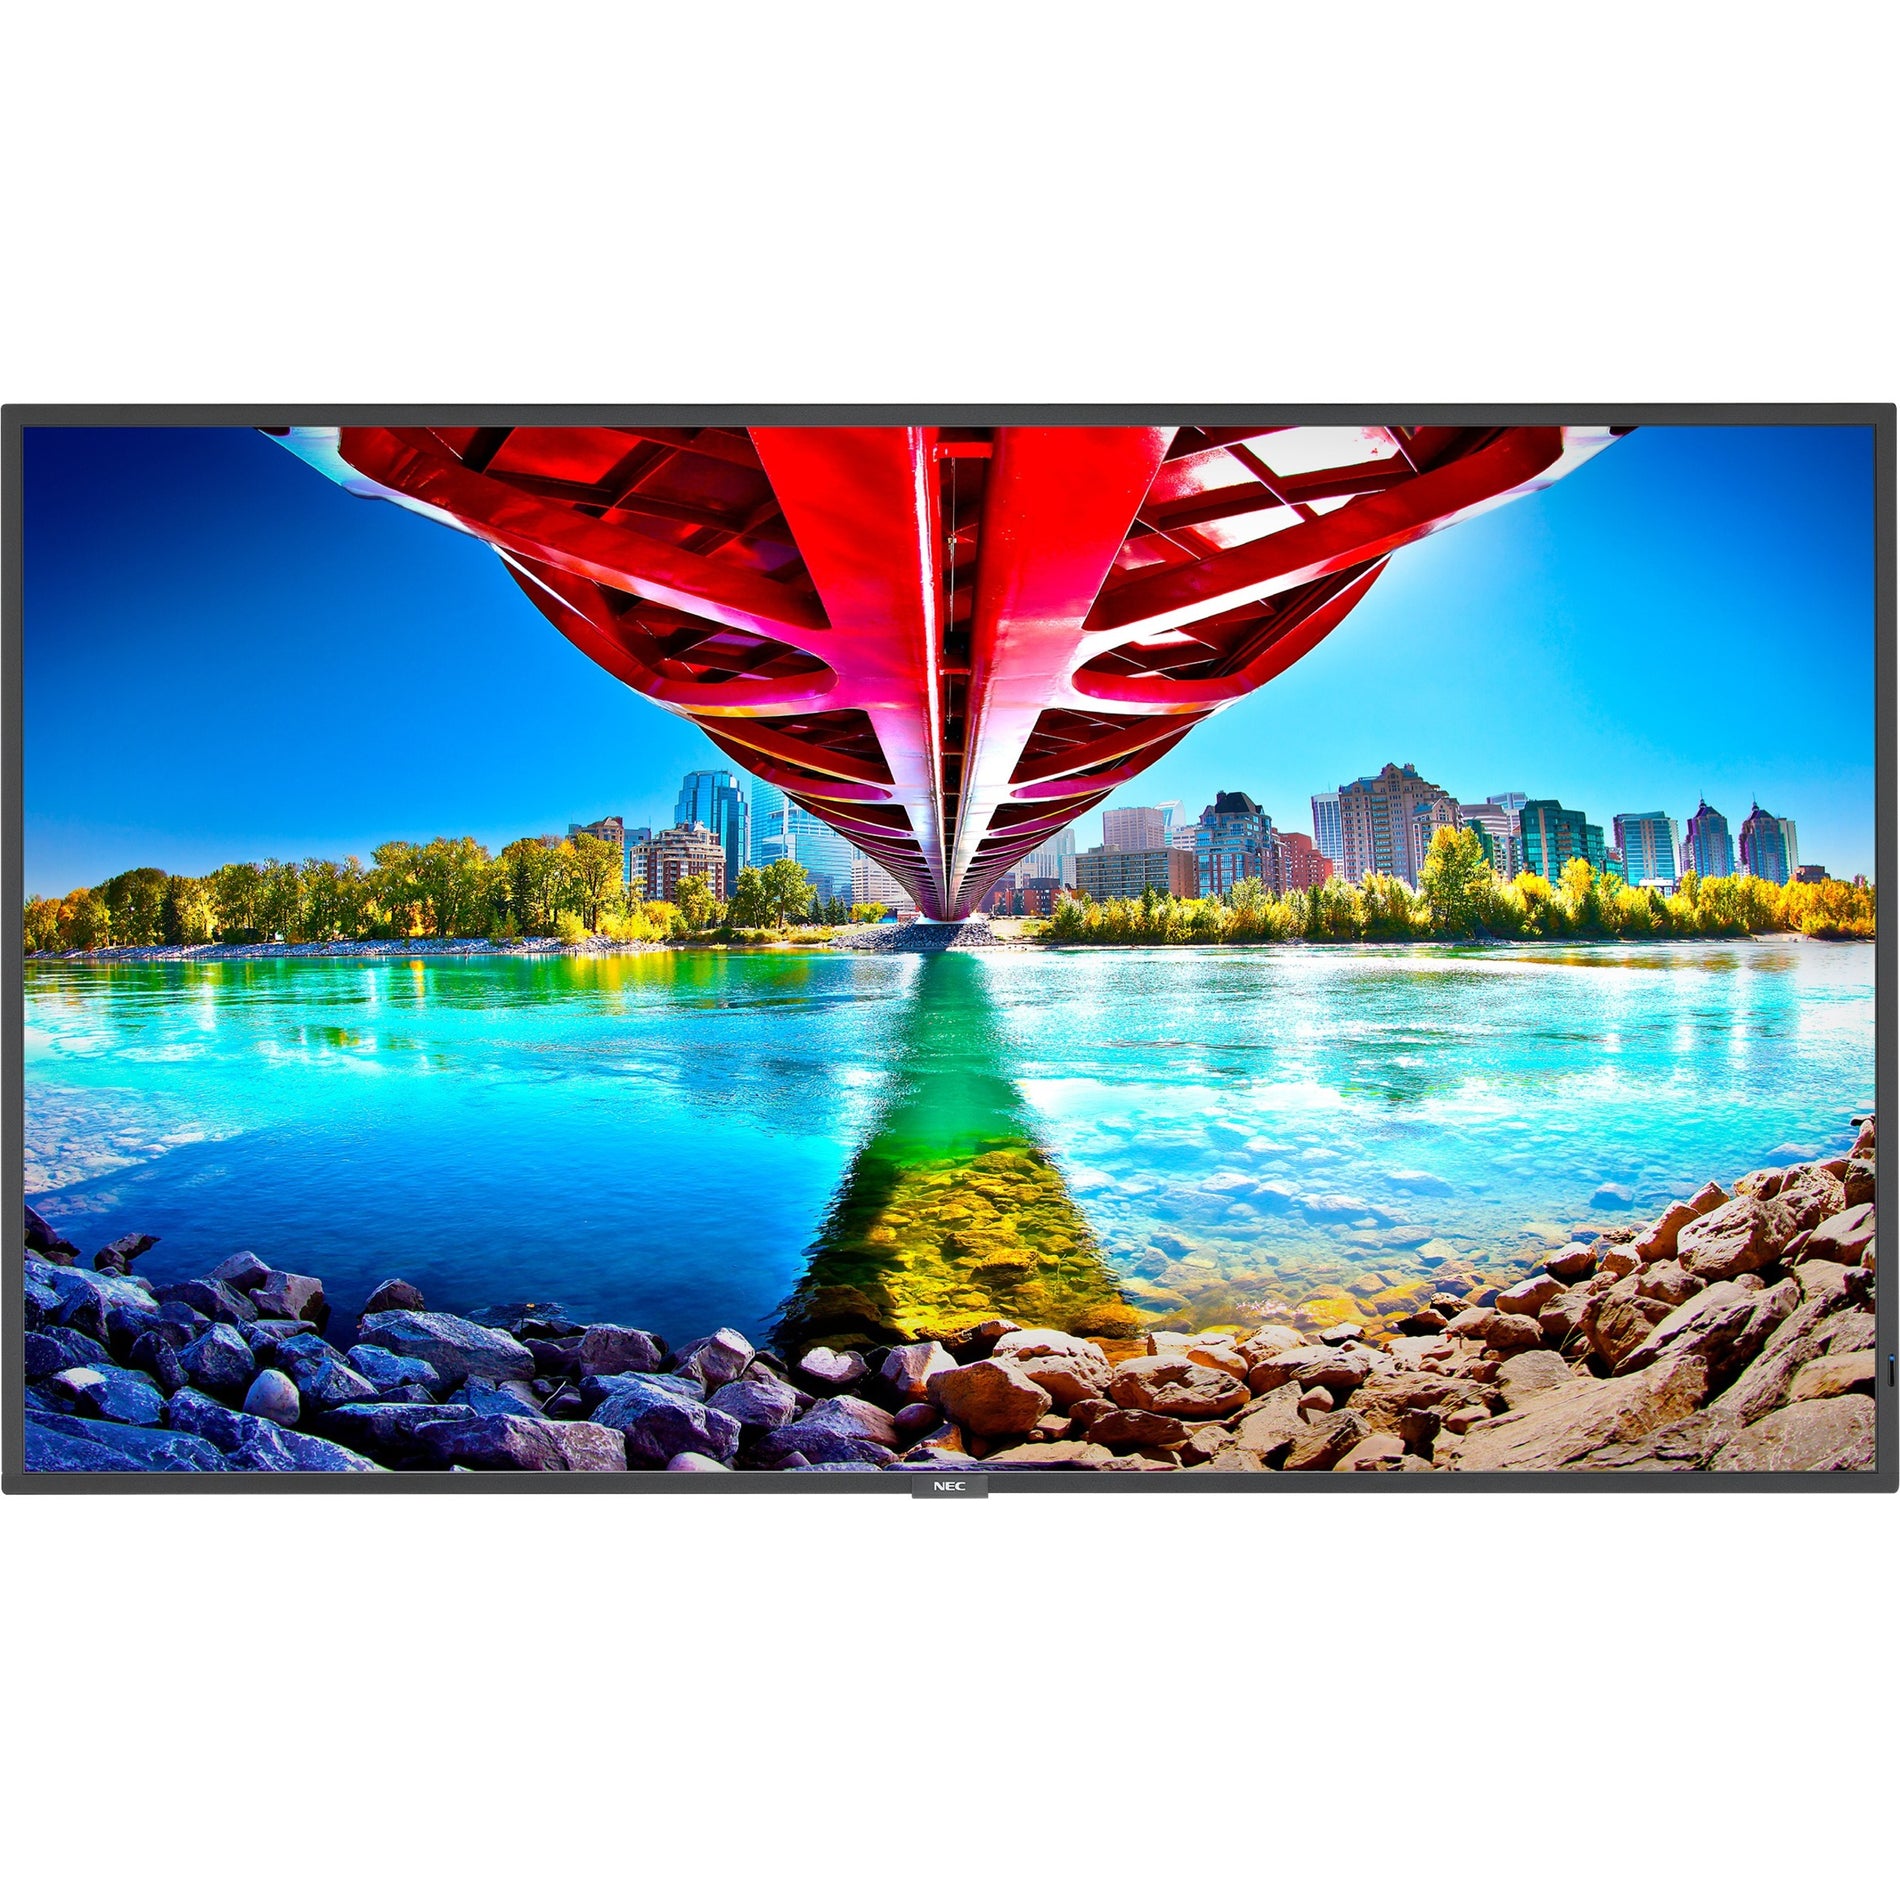 NEC Display ME551 55" Ultra High Definition Commercial Display, 4K HDR, Energy Star, 3 Year Warranty